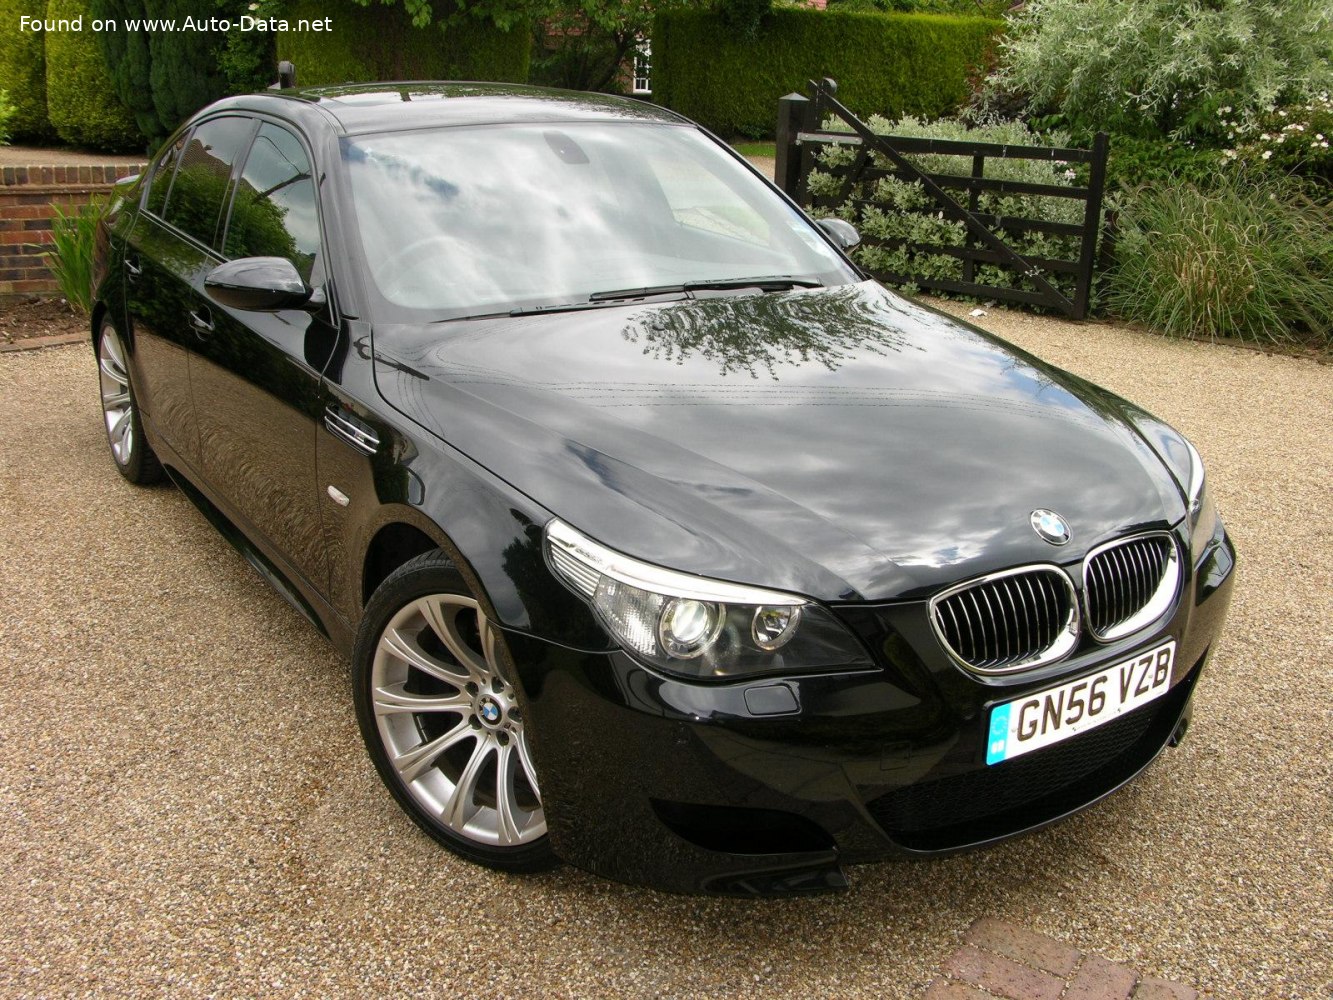 BMW M5 2005 Review